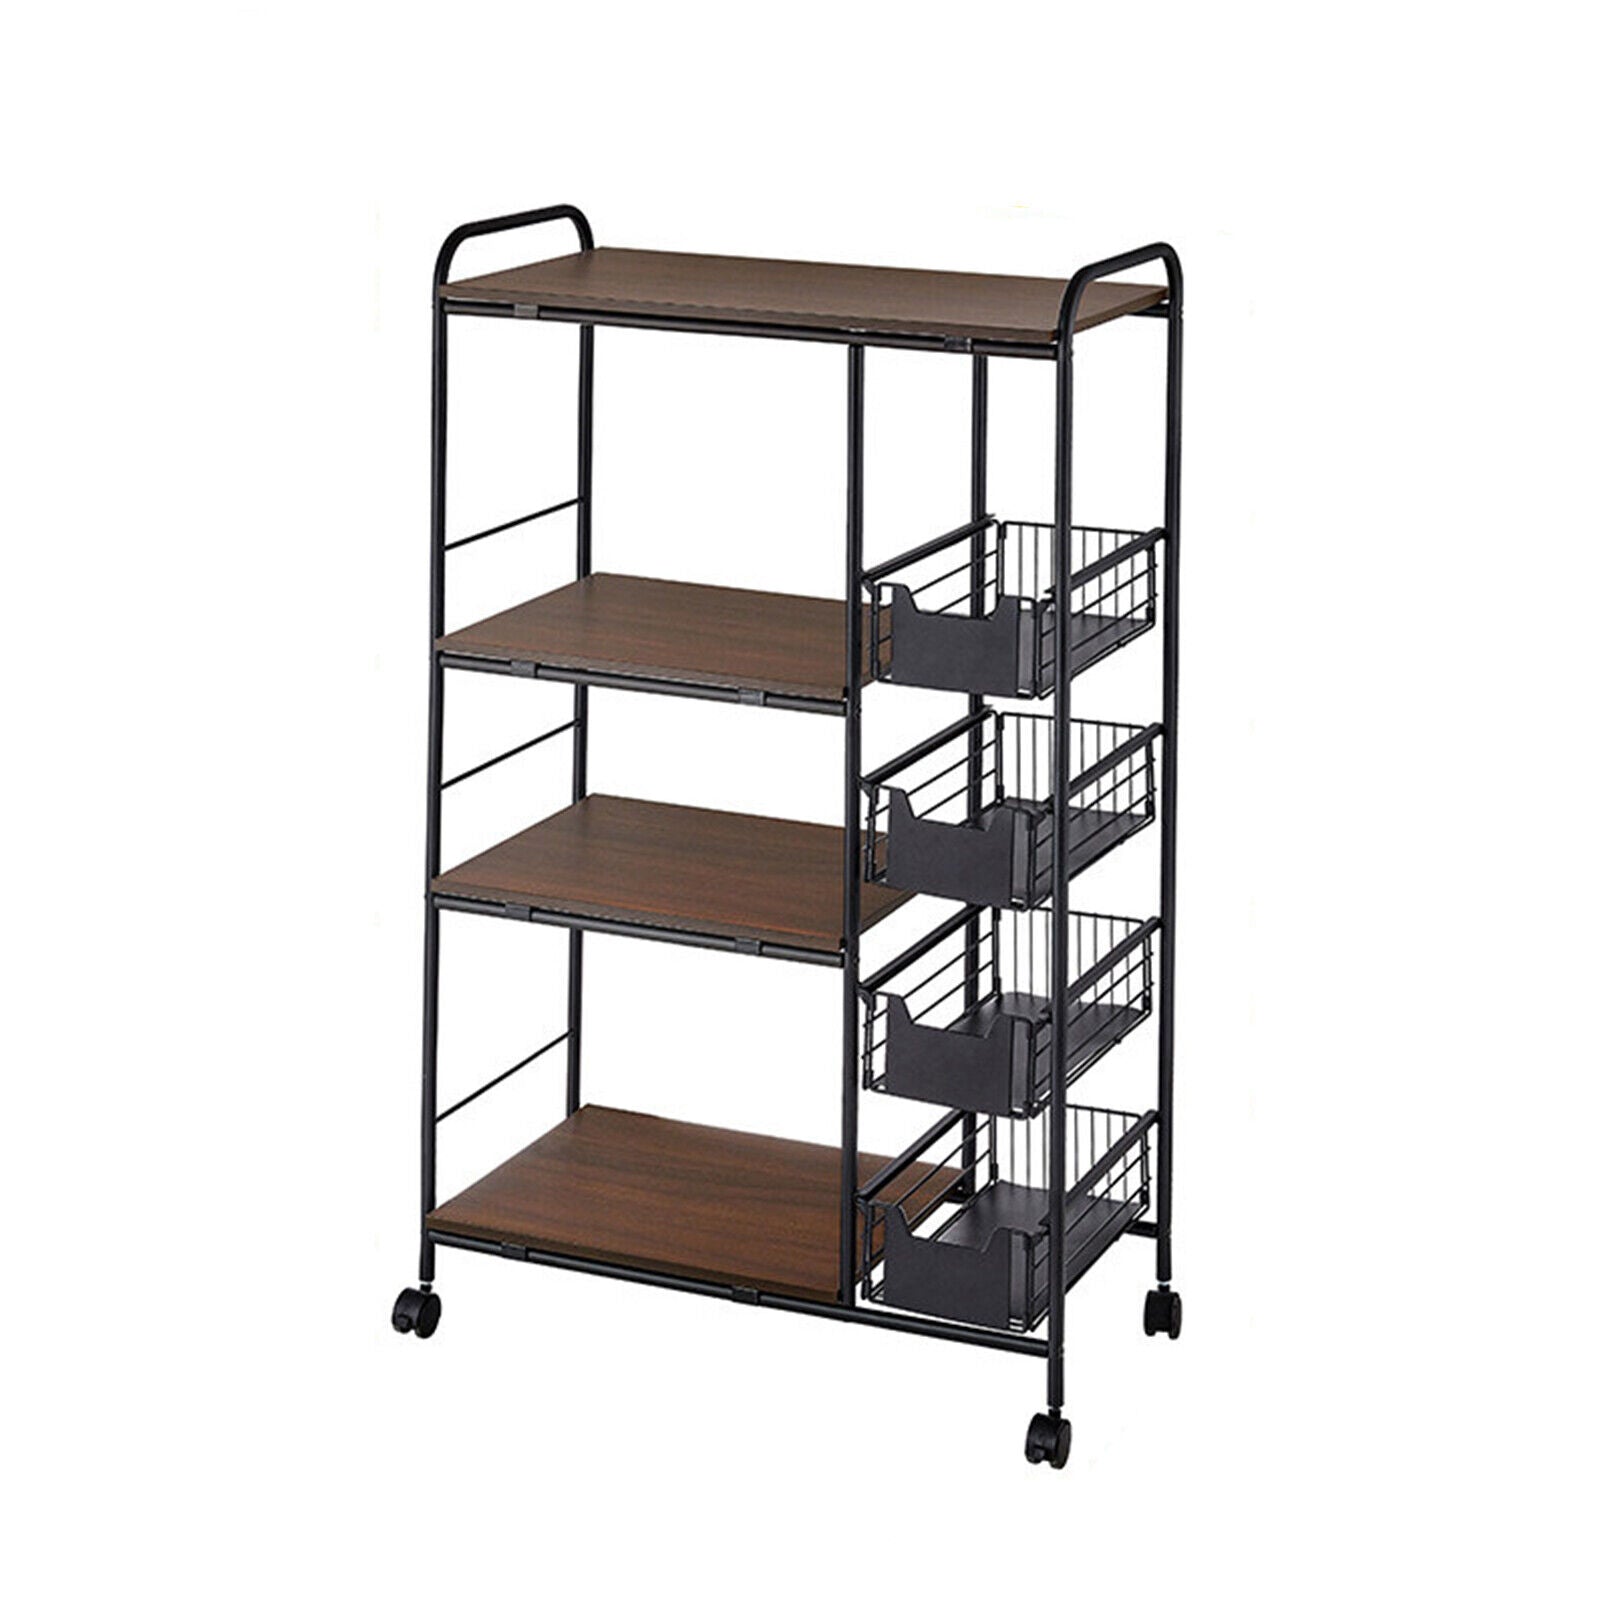 ZhdnBhnos Kitchen Storage Shelf Rack Cart Utility Microwave Oven Holder Stand Organizer with 4 Push-Pull Drawers 100 Pounds Load Capacity